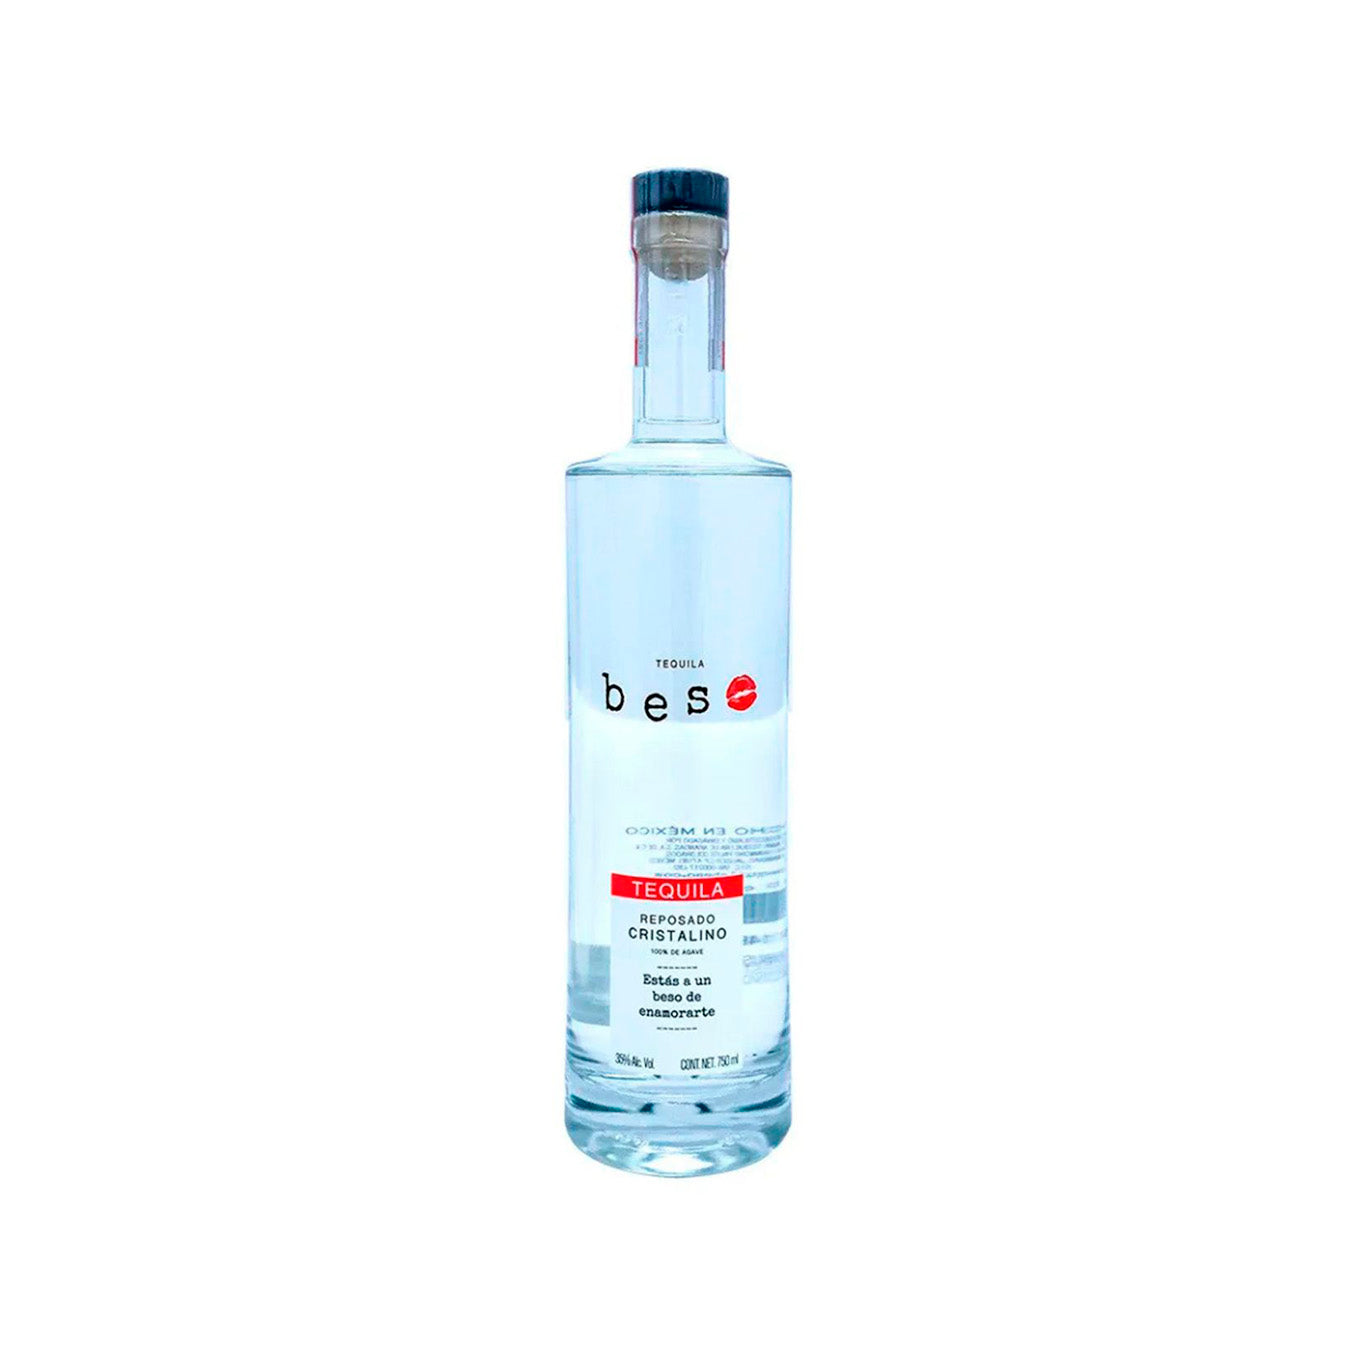 BESO TEQUILA 750 MLT 35%